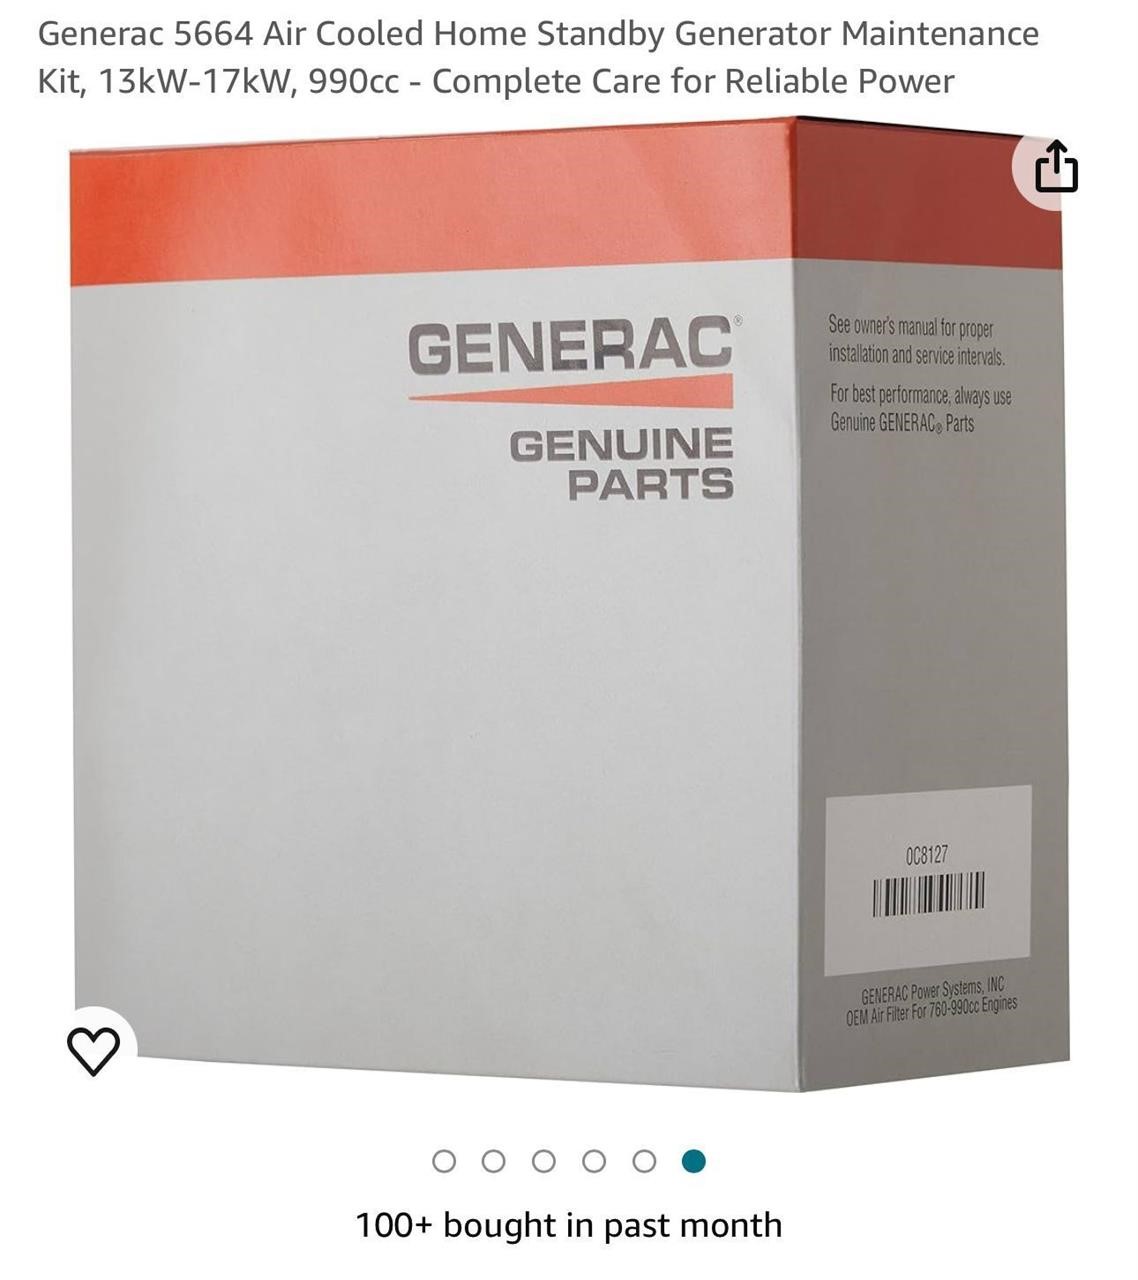 Generac 5664 Air Cooled Home Standby Generator